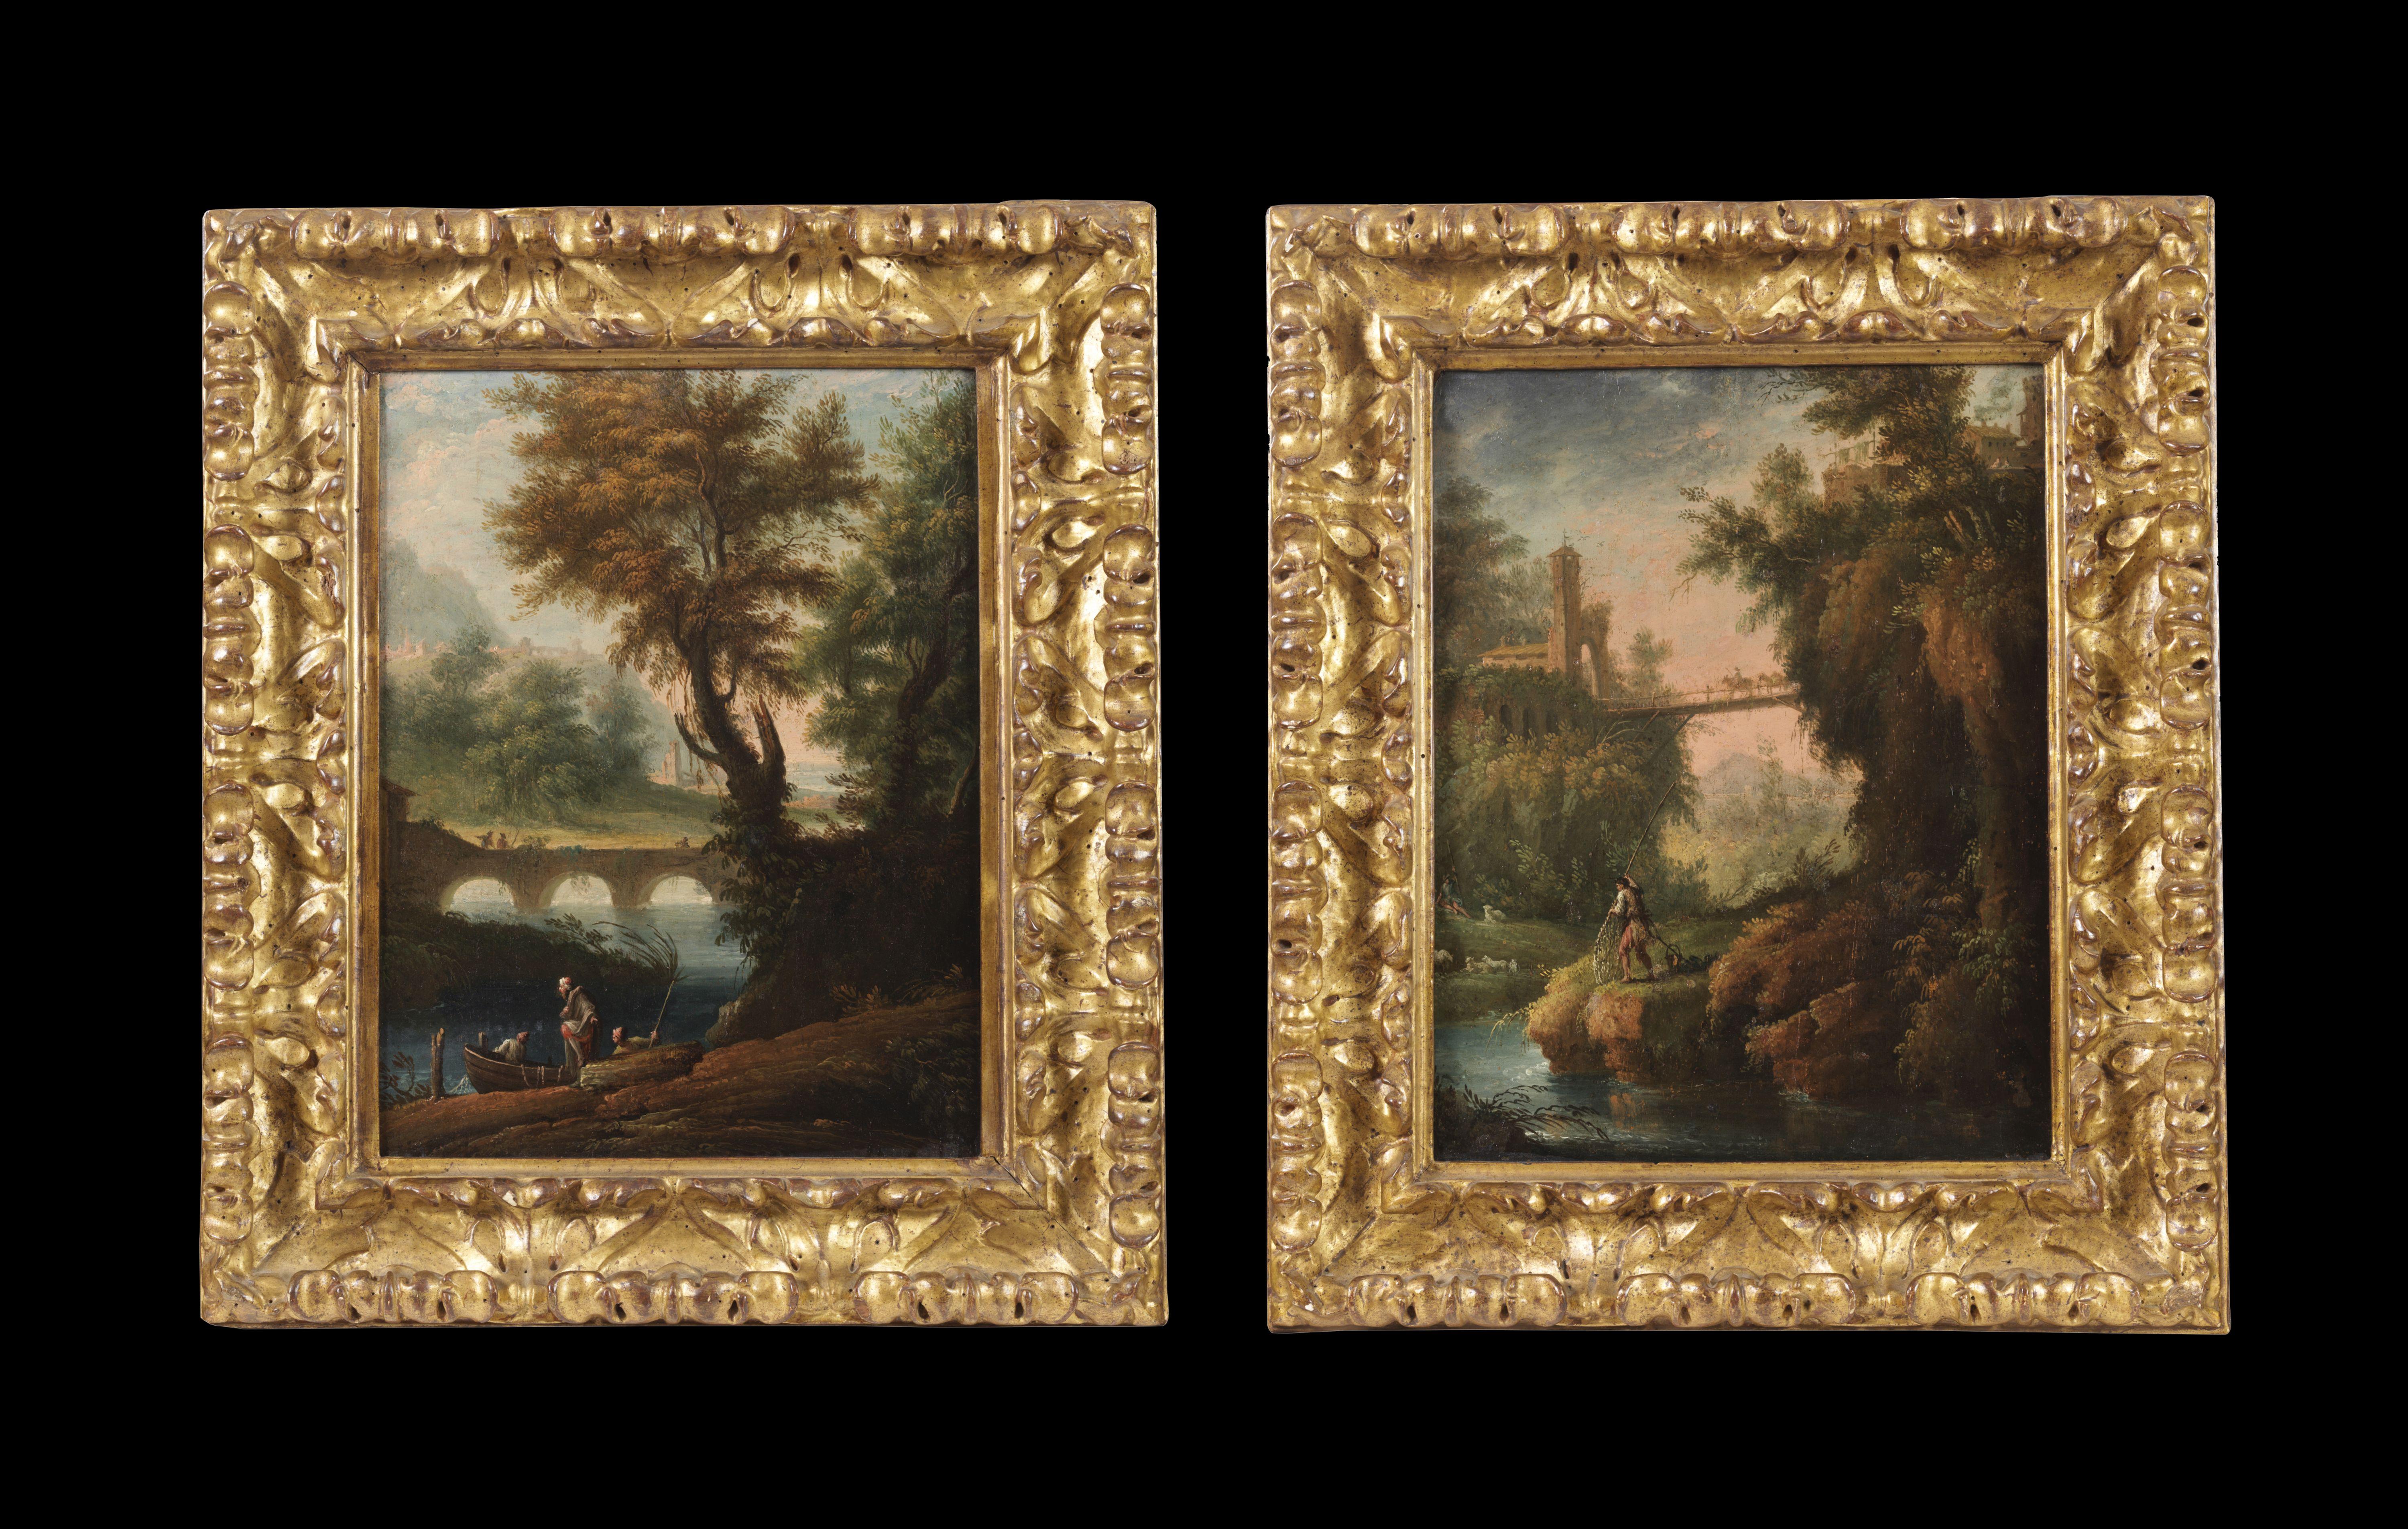 I examined with keen interest this pair of paintings depicting pleasant and tasty "Country Scenes " (Paintings oil on panel, 33 x 26 cm without frames and 50 x 42 cm with beautiful period frames), with fishermen working at dawn given the orange tone